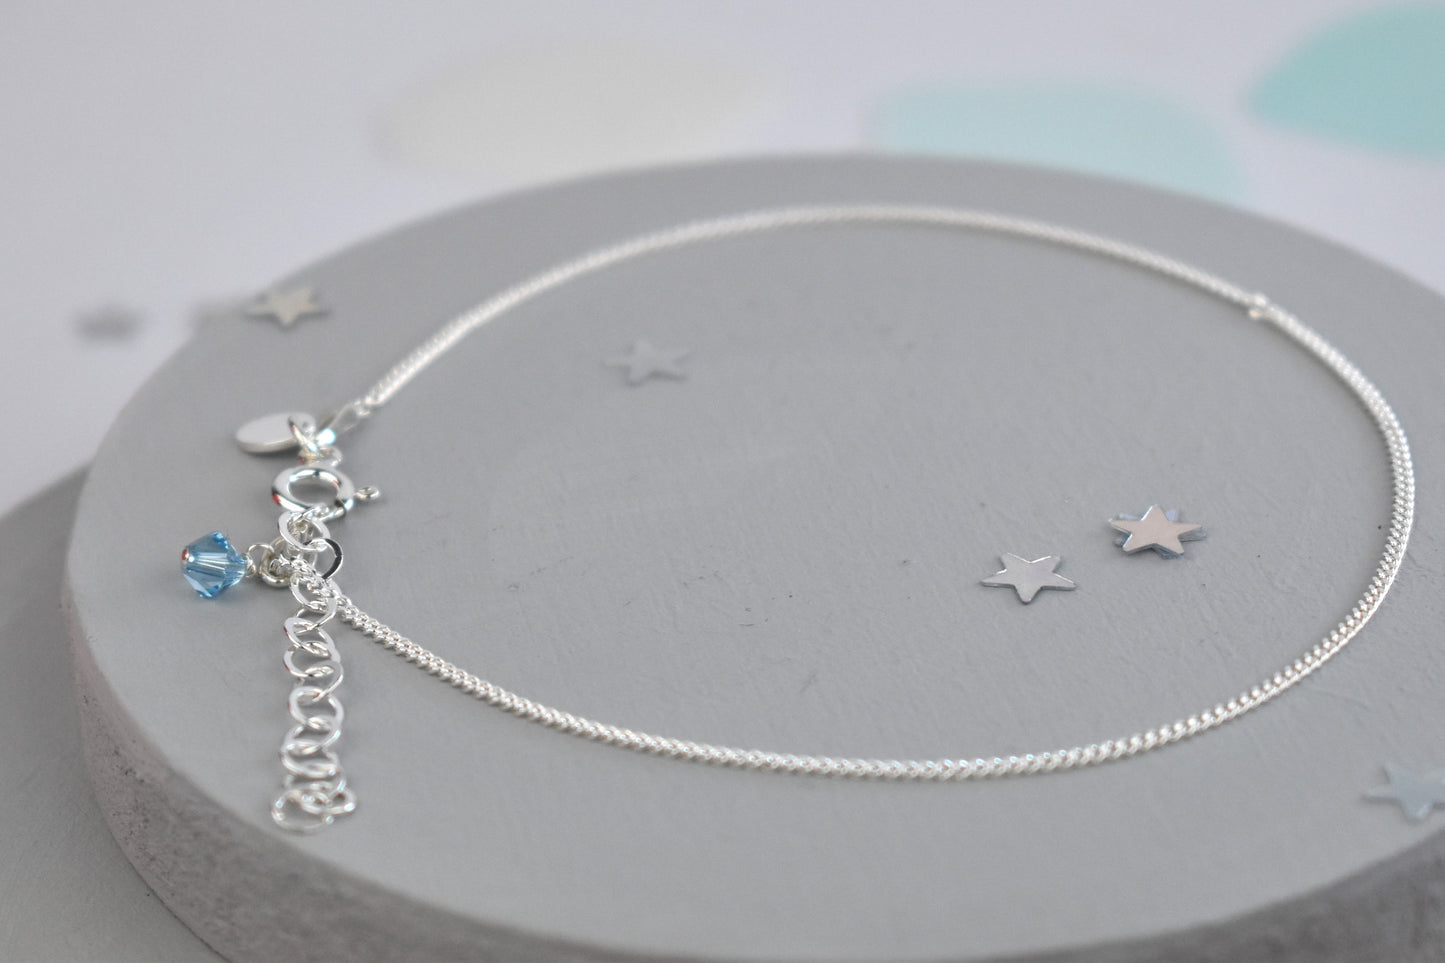 Sterling silver anklet shown with blue crystal and extender chain.